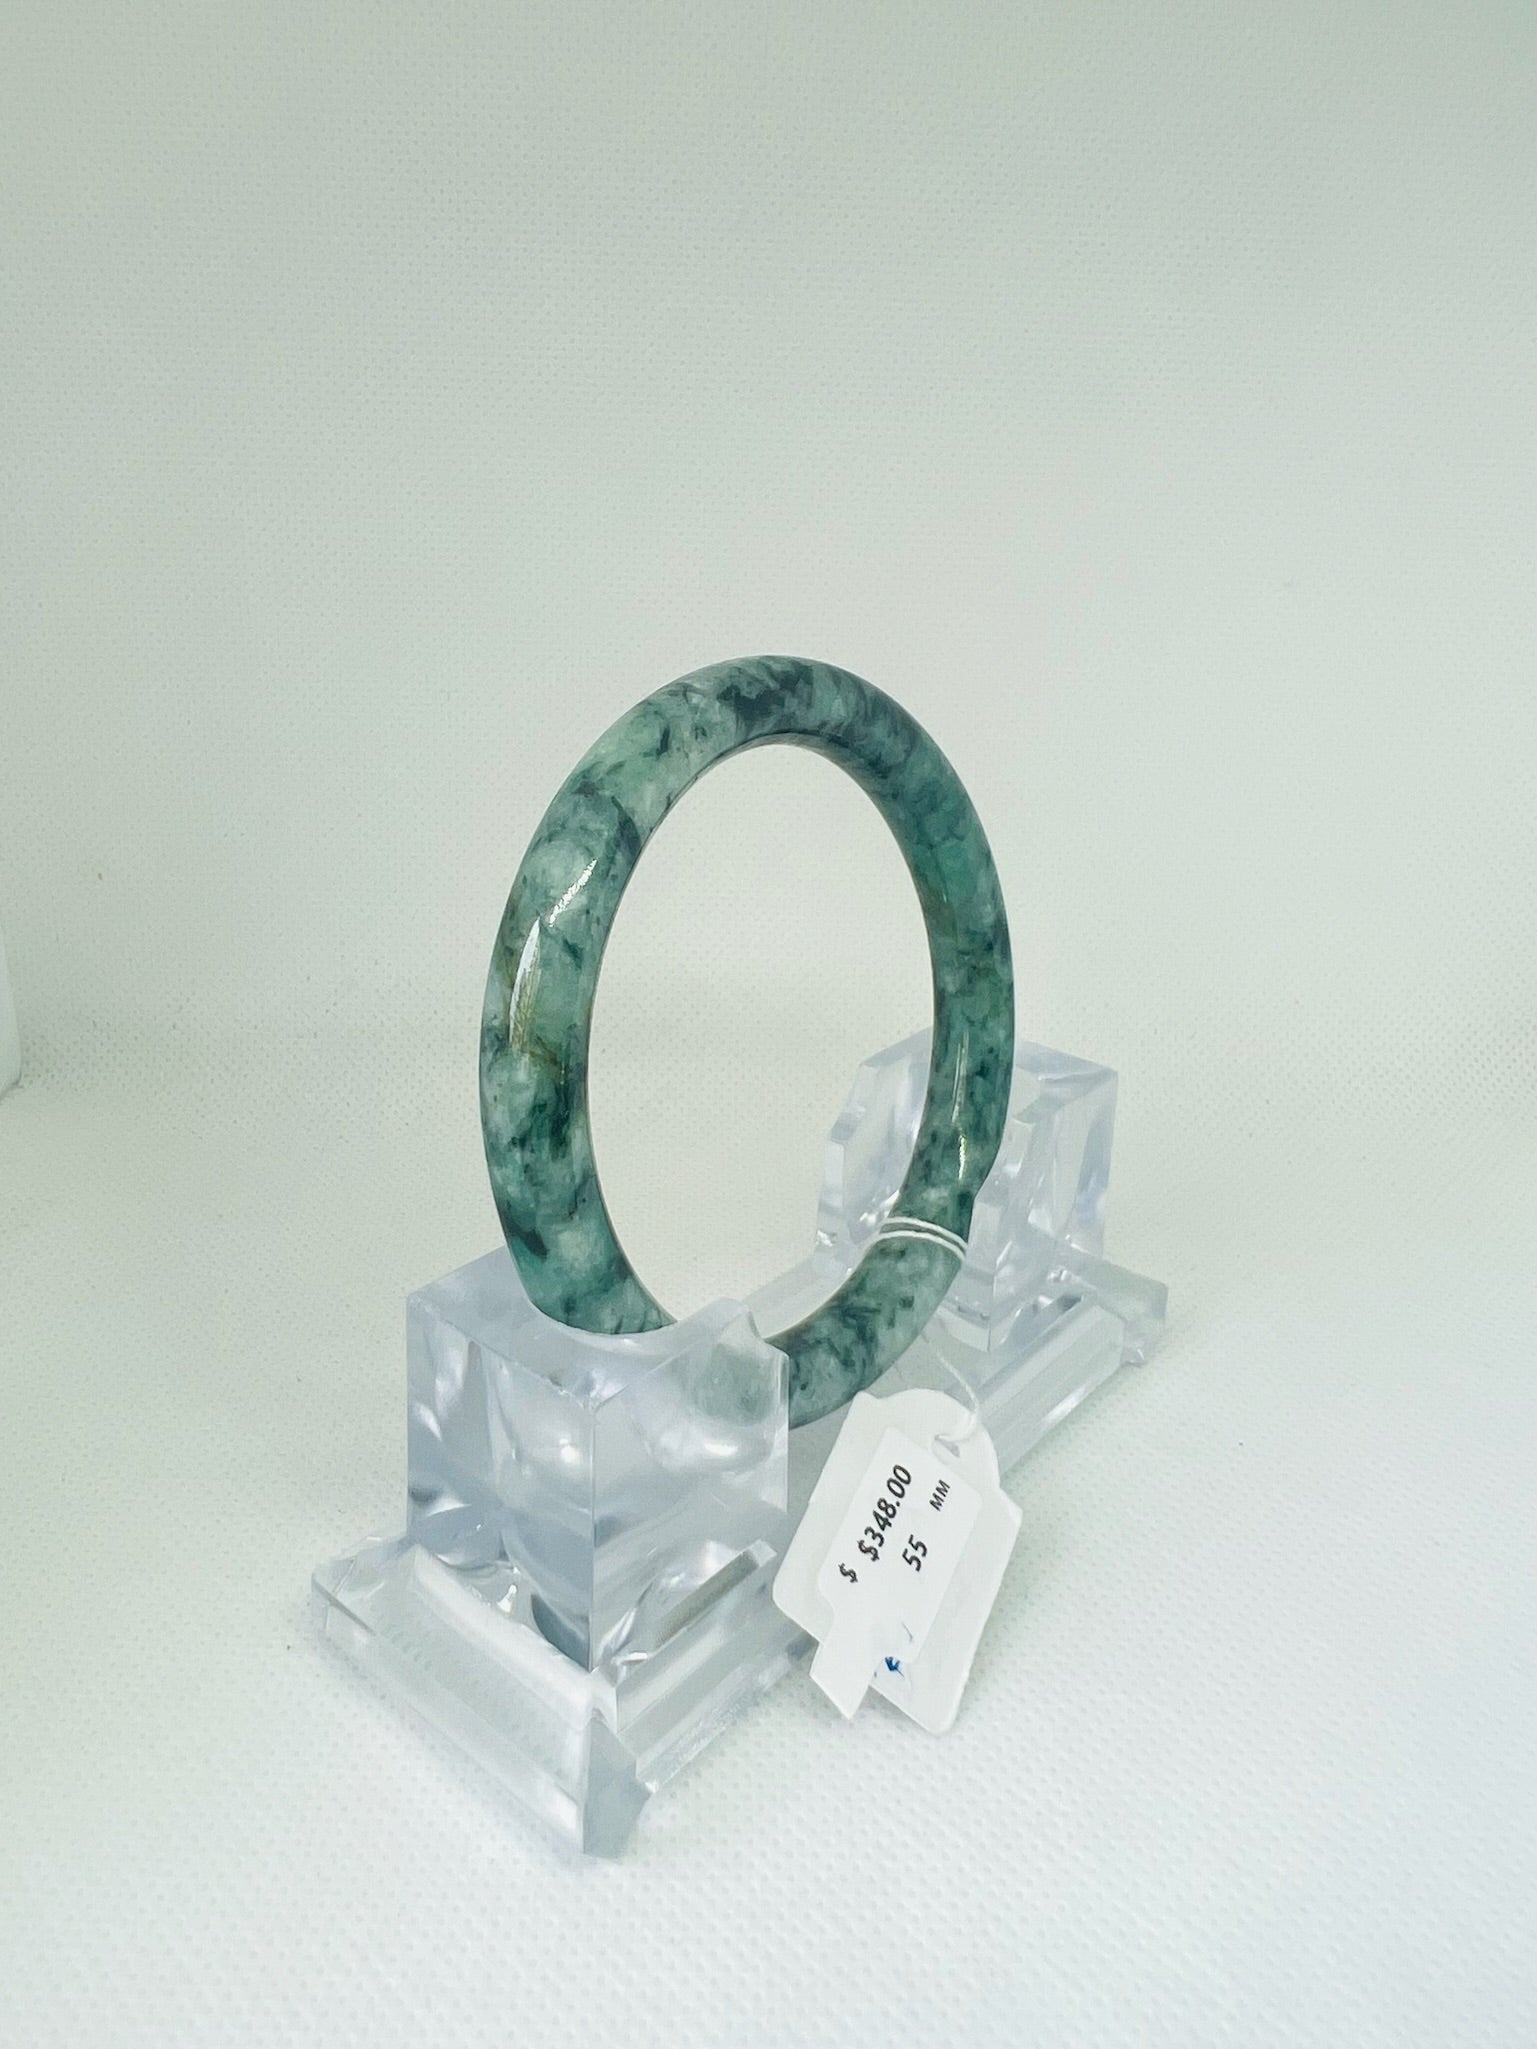 Grade A Natural Jade Bangle with certificate #36575